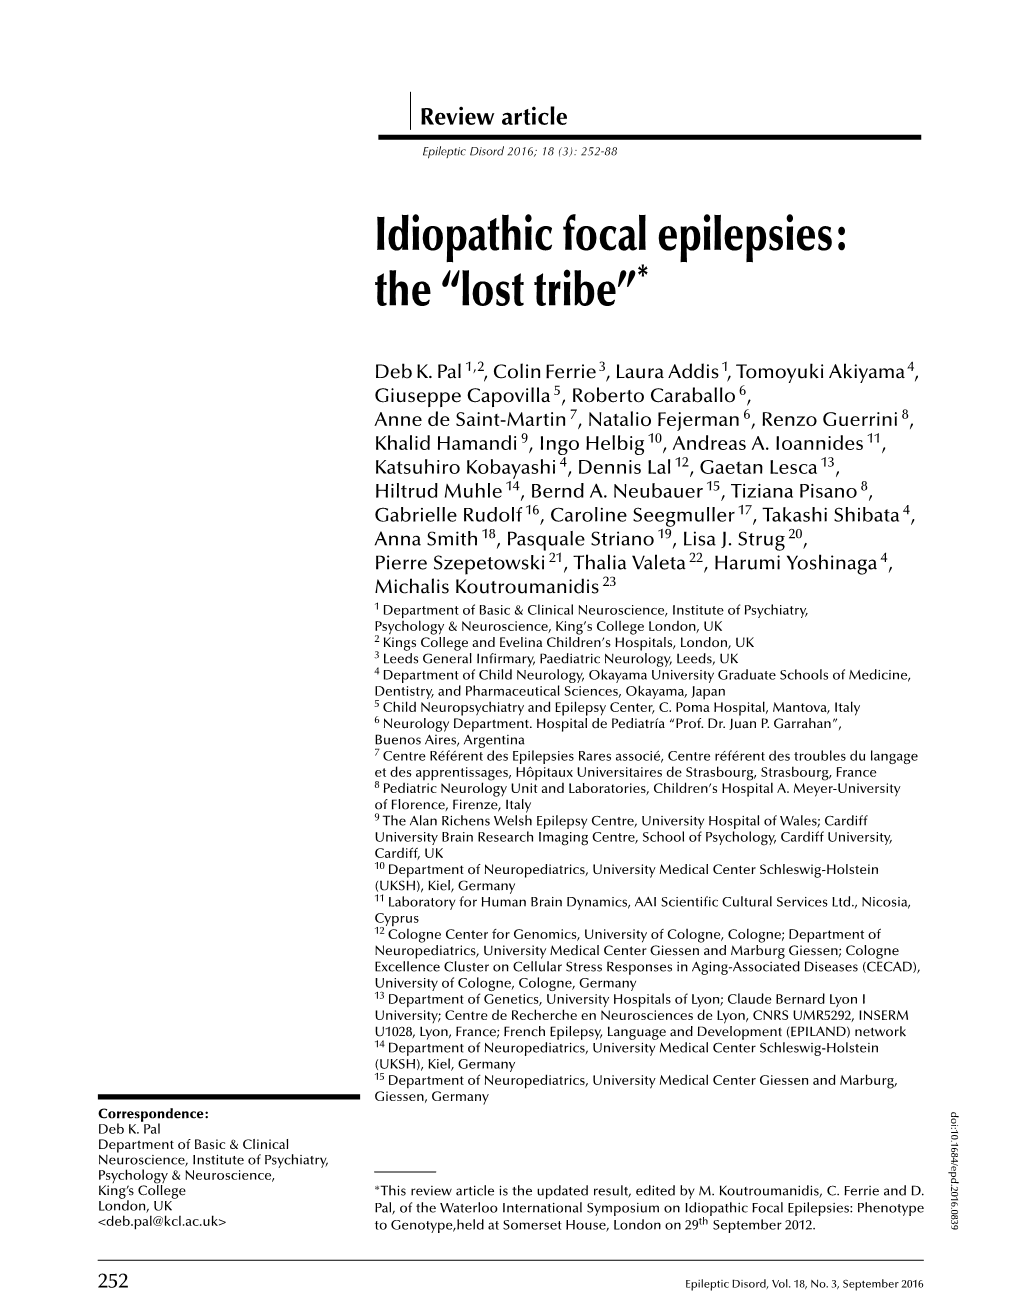 Idiopathic Focal Epilepsies: the “Lost Tribe”*